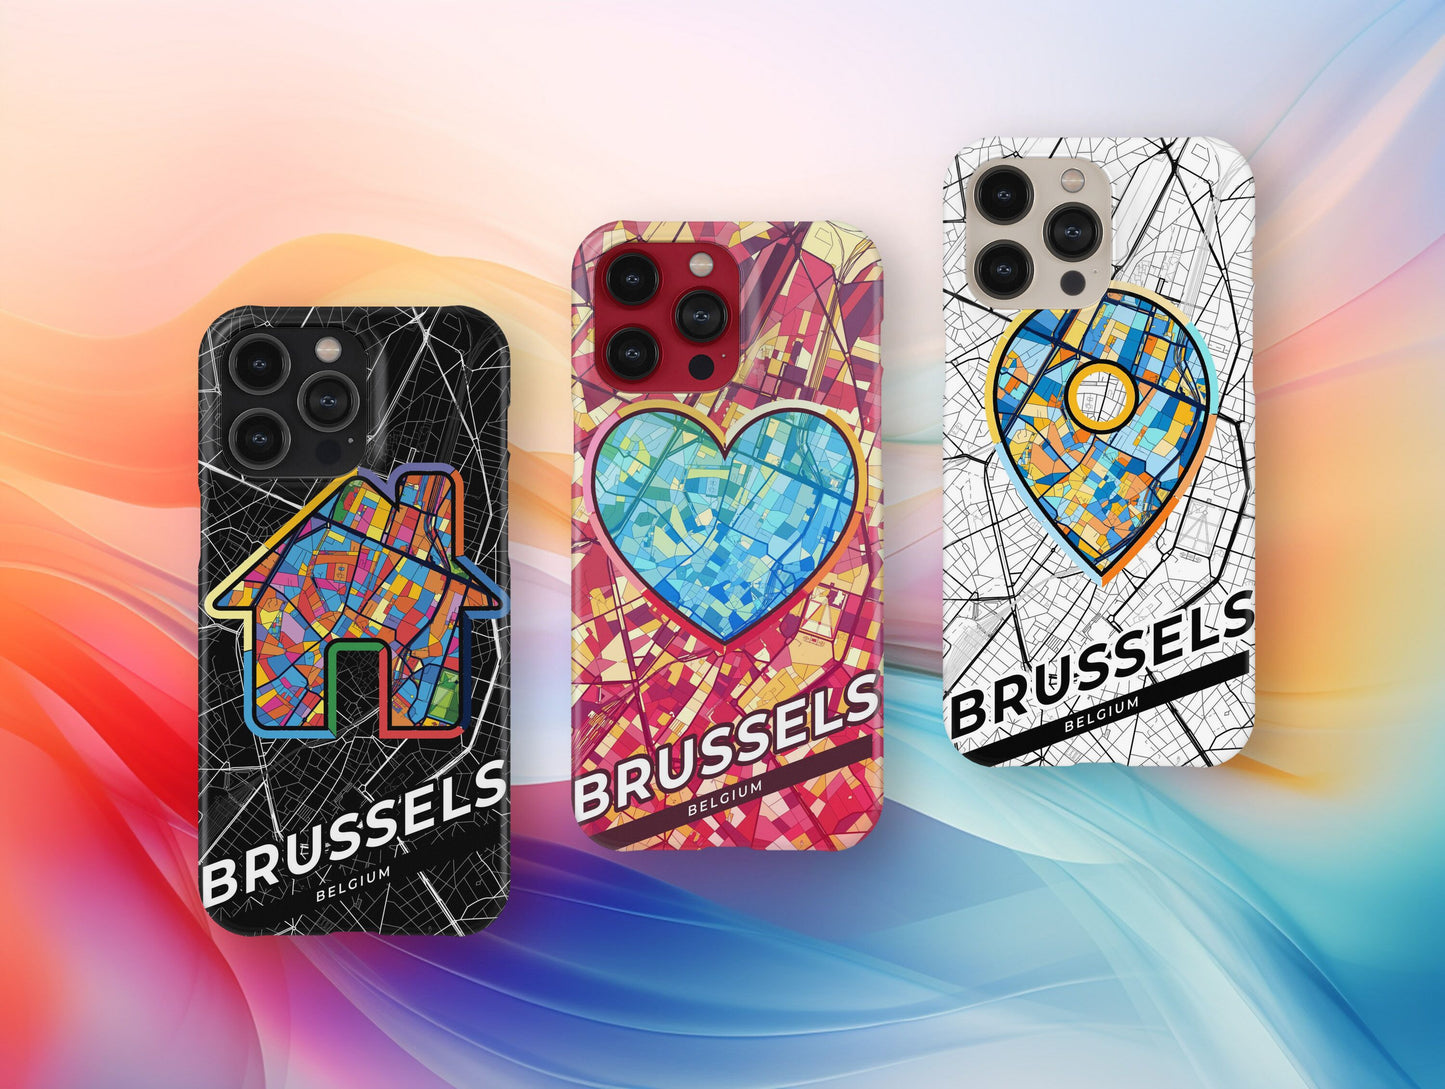 Brussels Belgium slim phone case with colorful icon. Birthday, wedding or housewarming gift. Couple match cases.